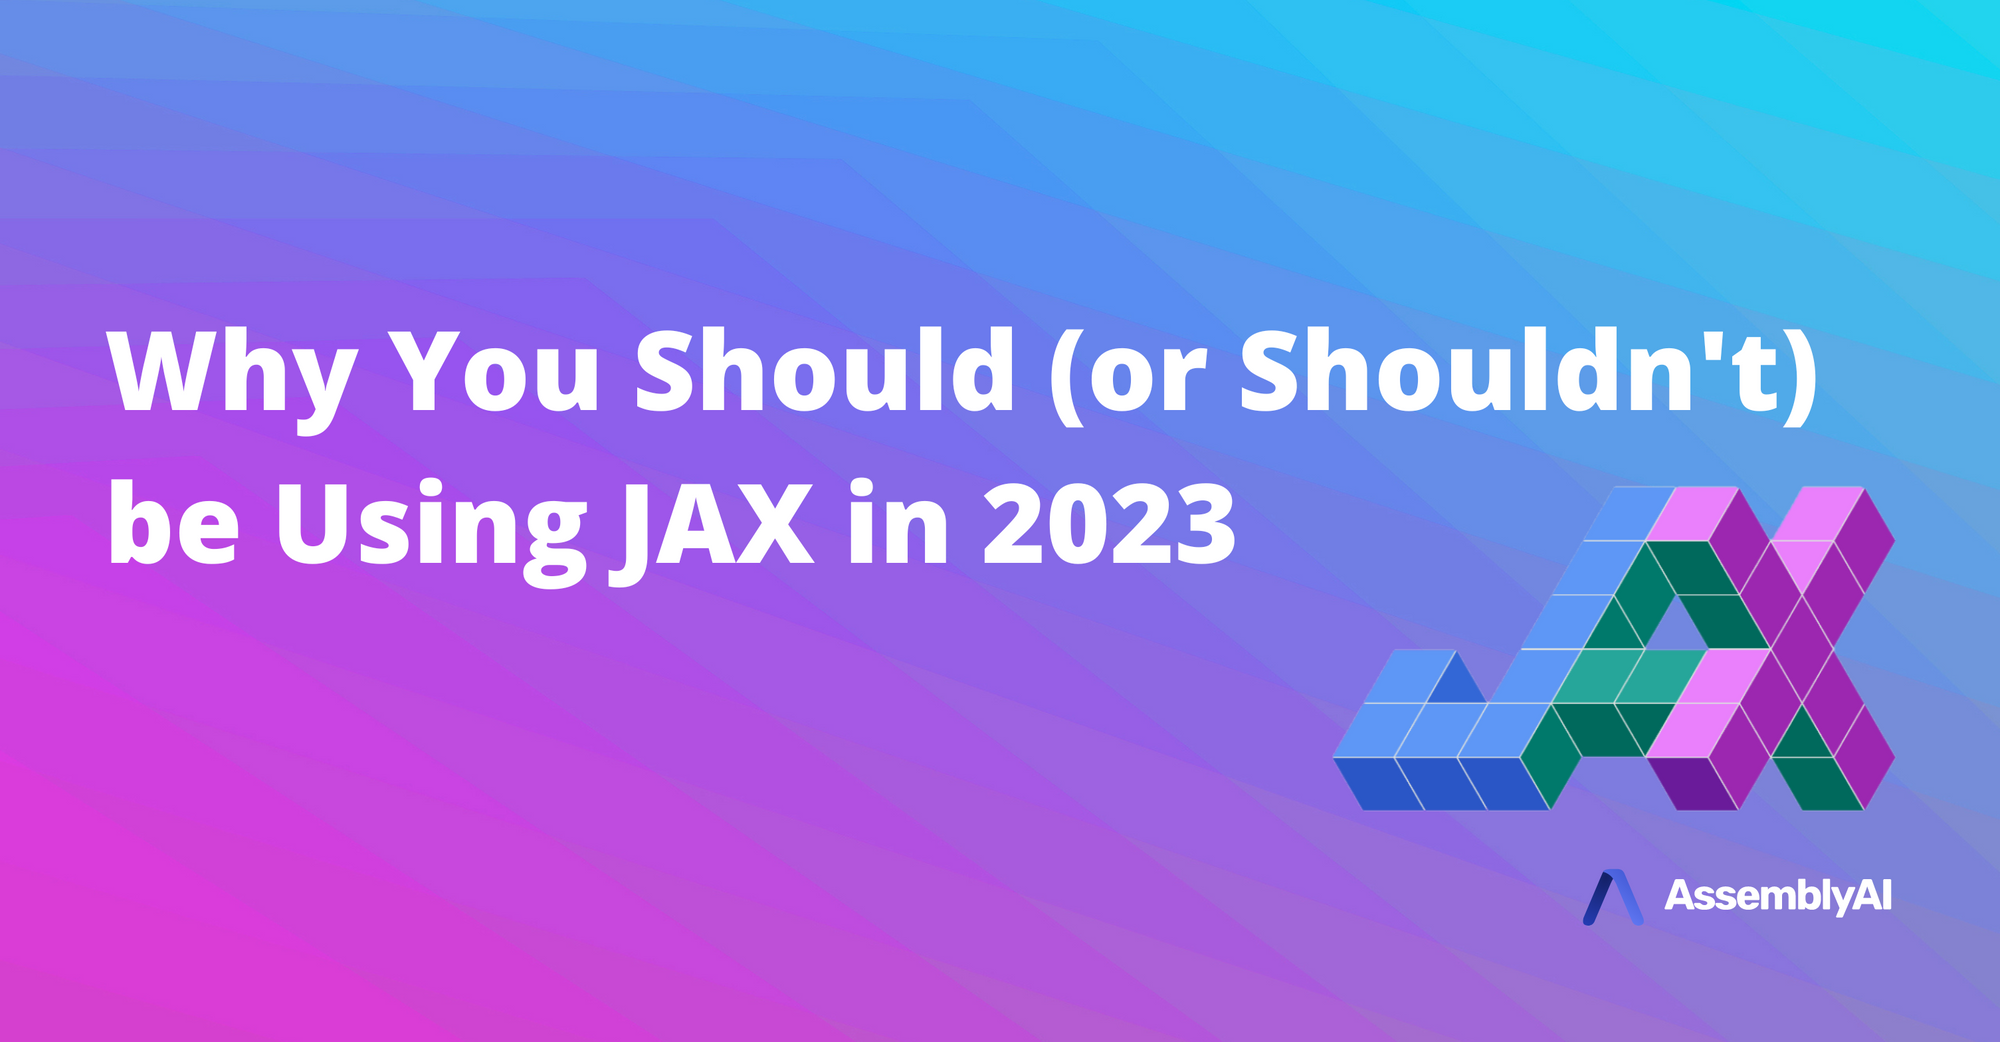 Why You Should (or Shouldn't) be Using Google's JAX in 2023